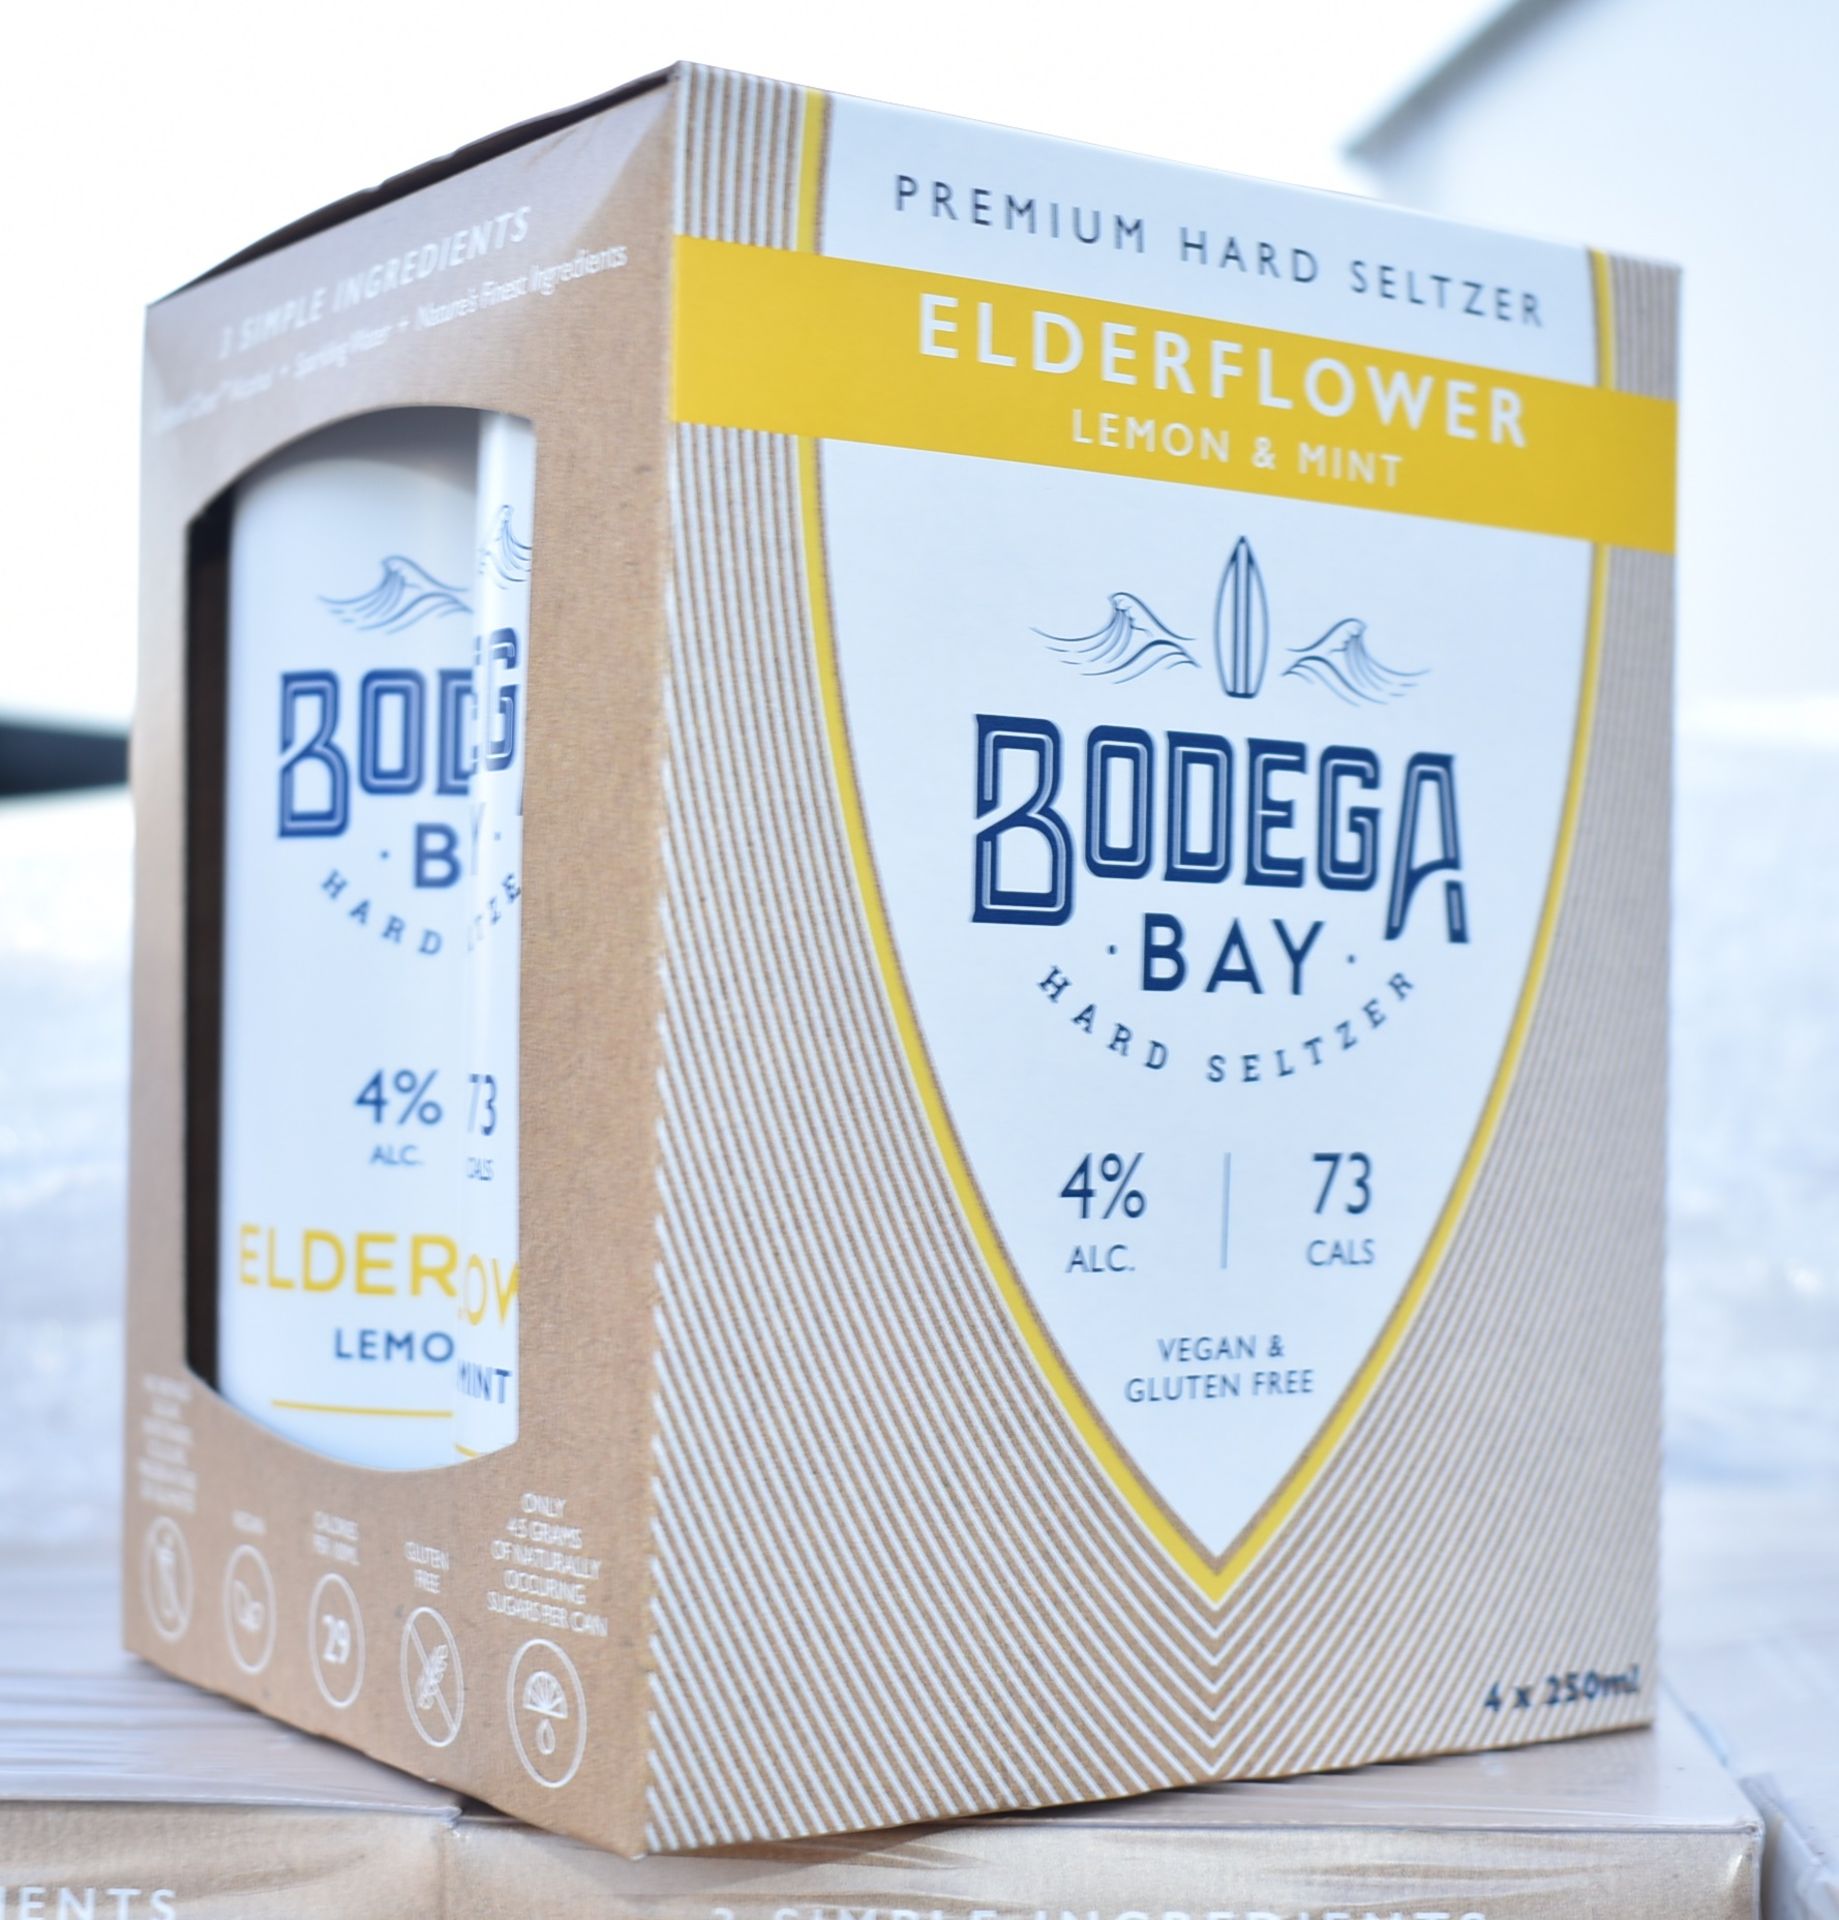 360 x Cans of Bodega Bay Hard Seltzer 250ml Alcoholic Sparkling Water Drinks - Various Flavours - Image 9 of 15